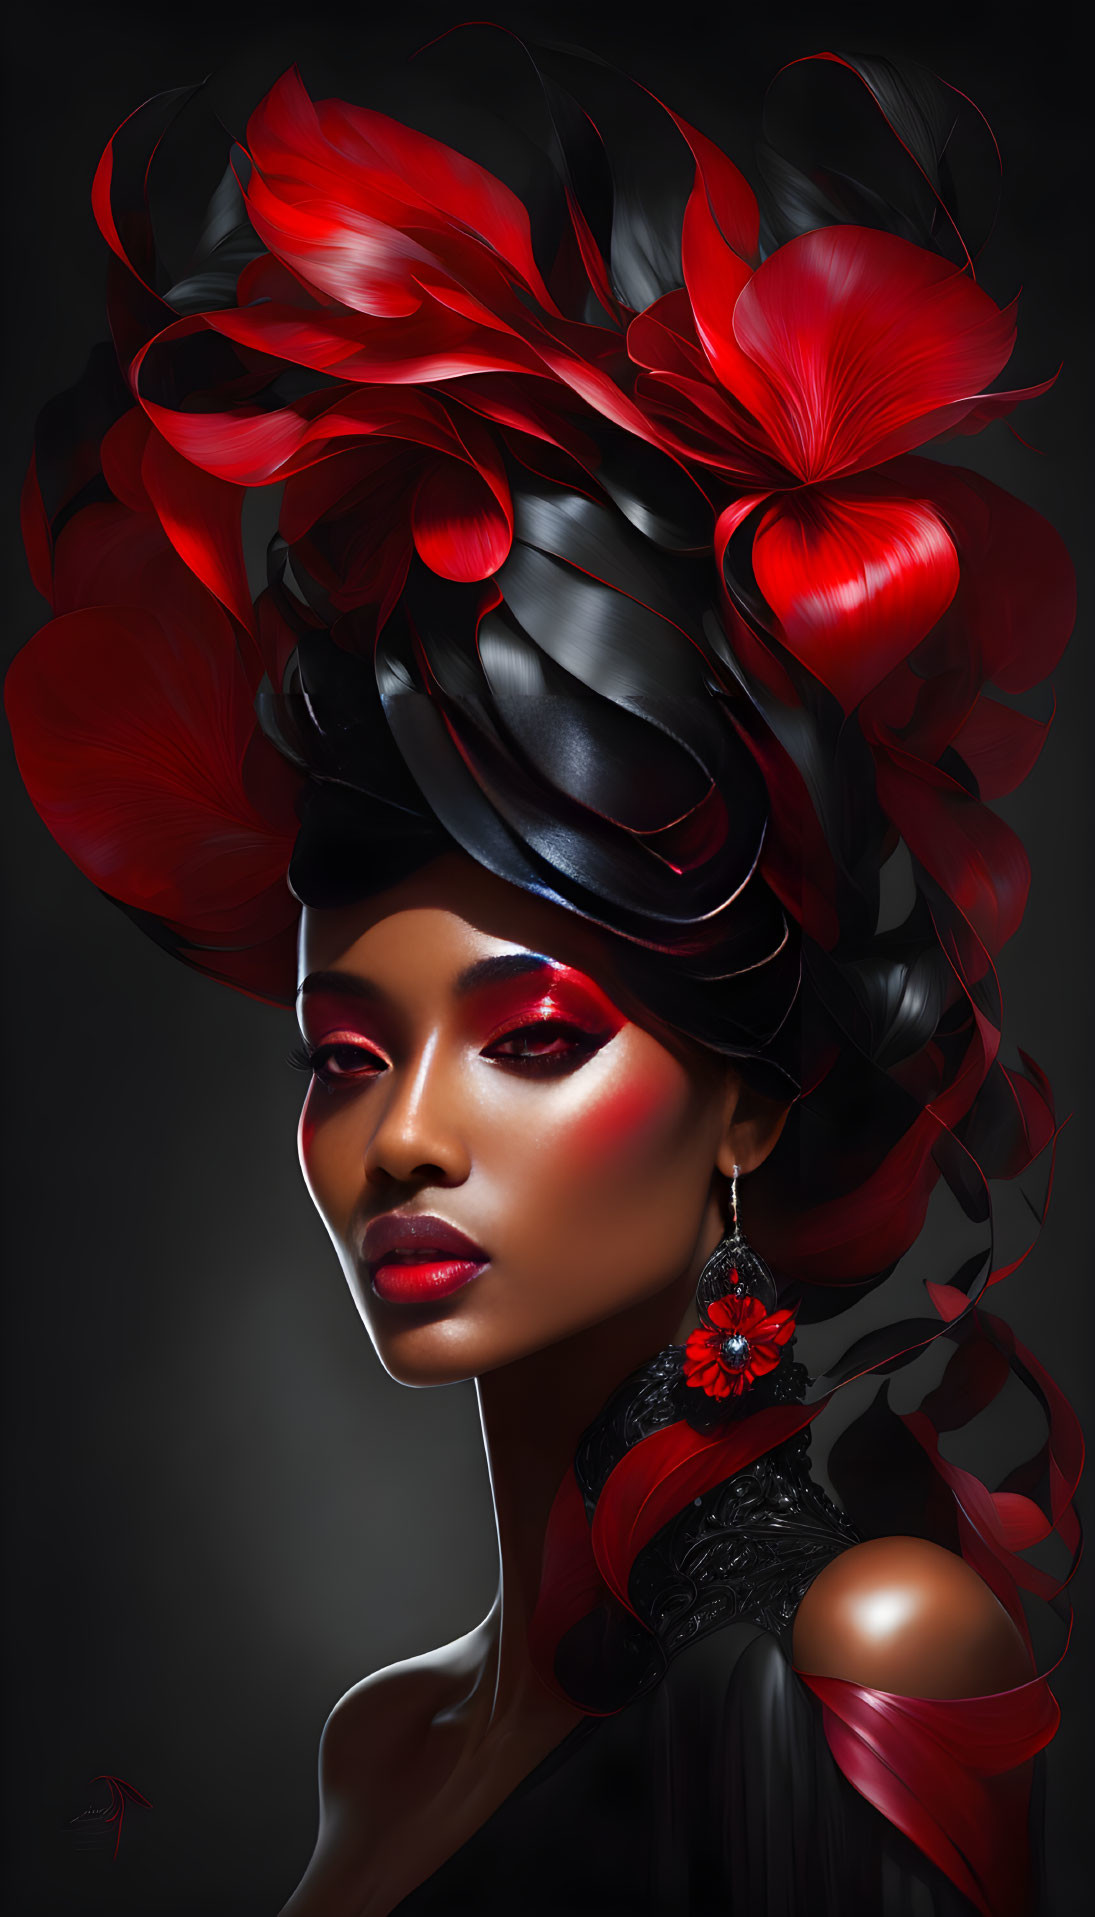 Vibrant red and black headpiece on woman with bold makeup